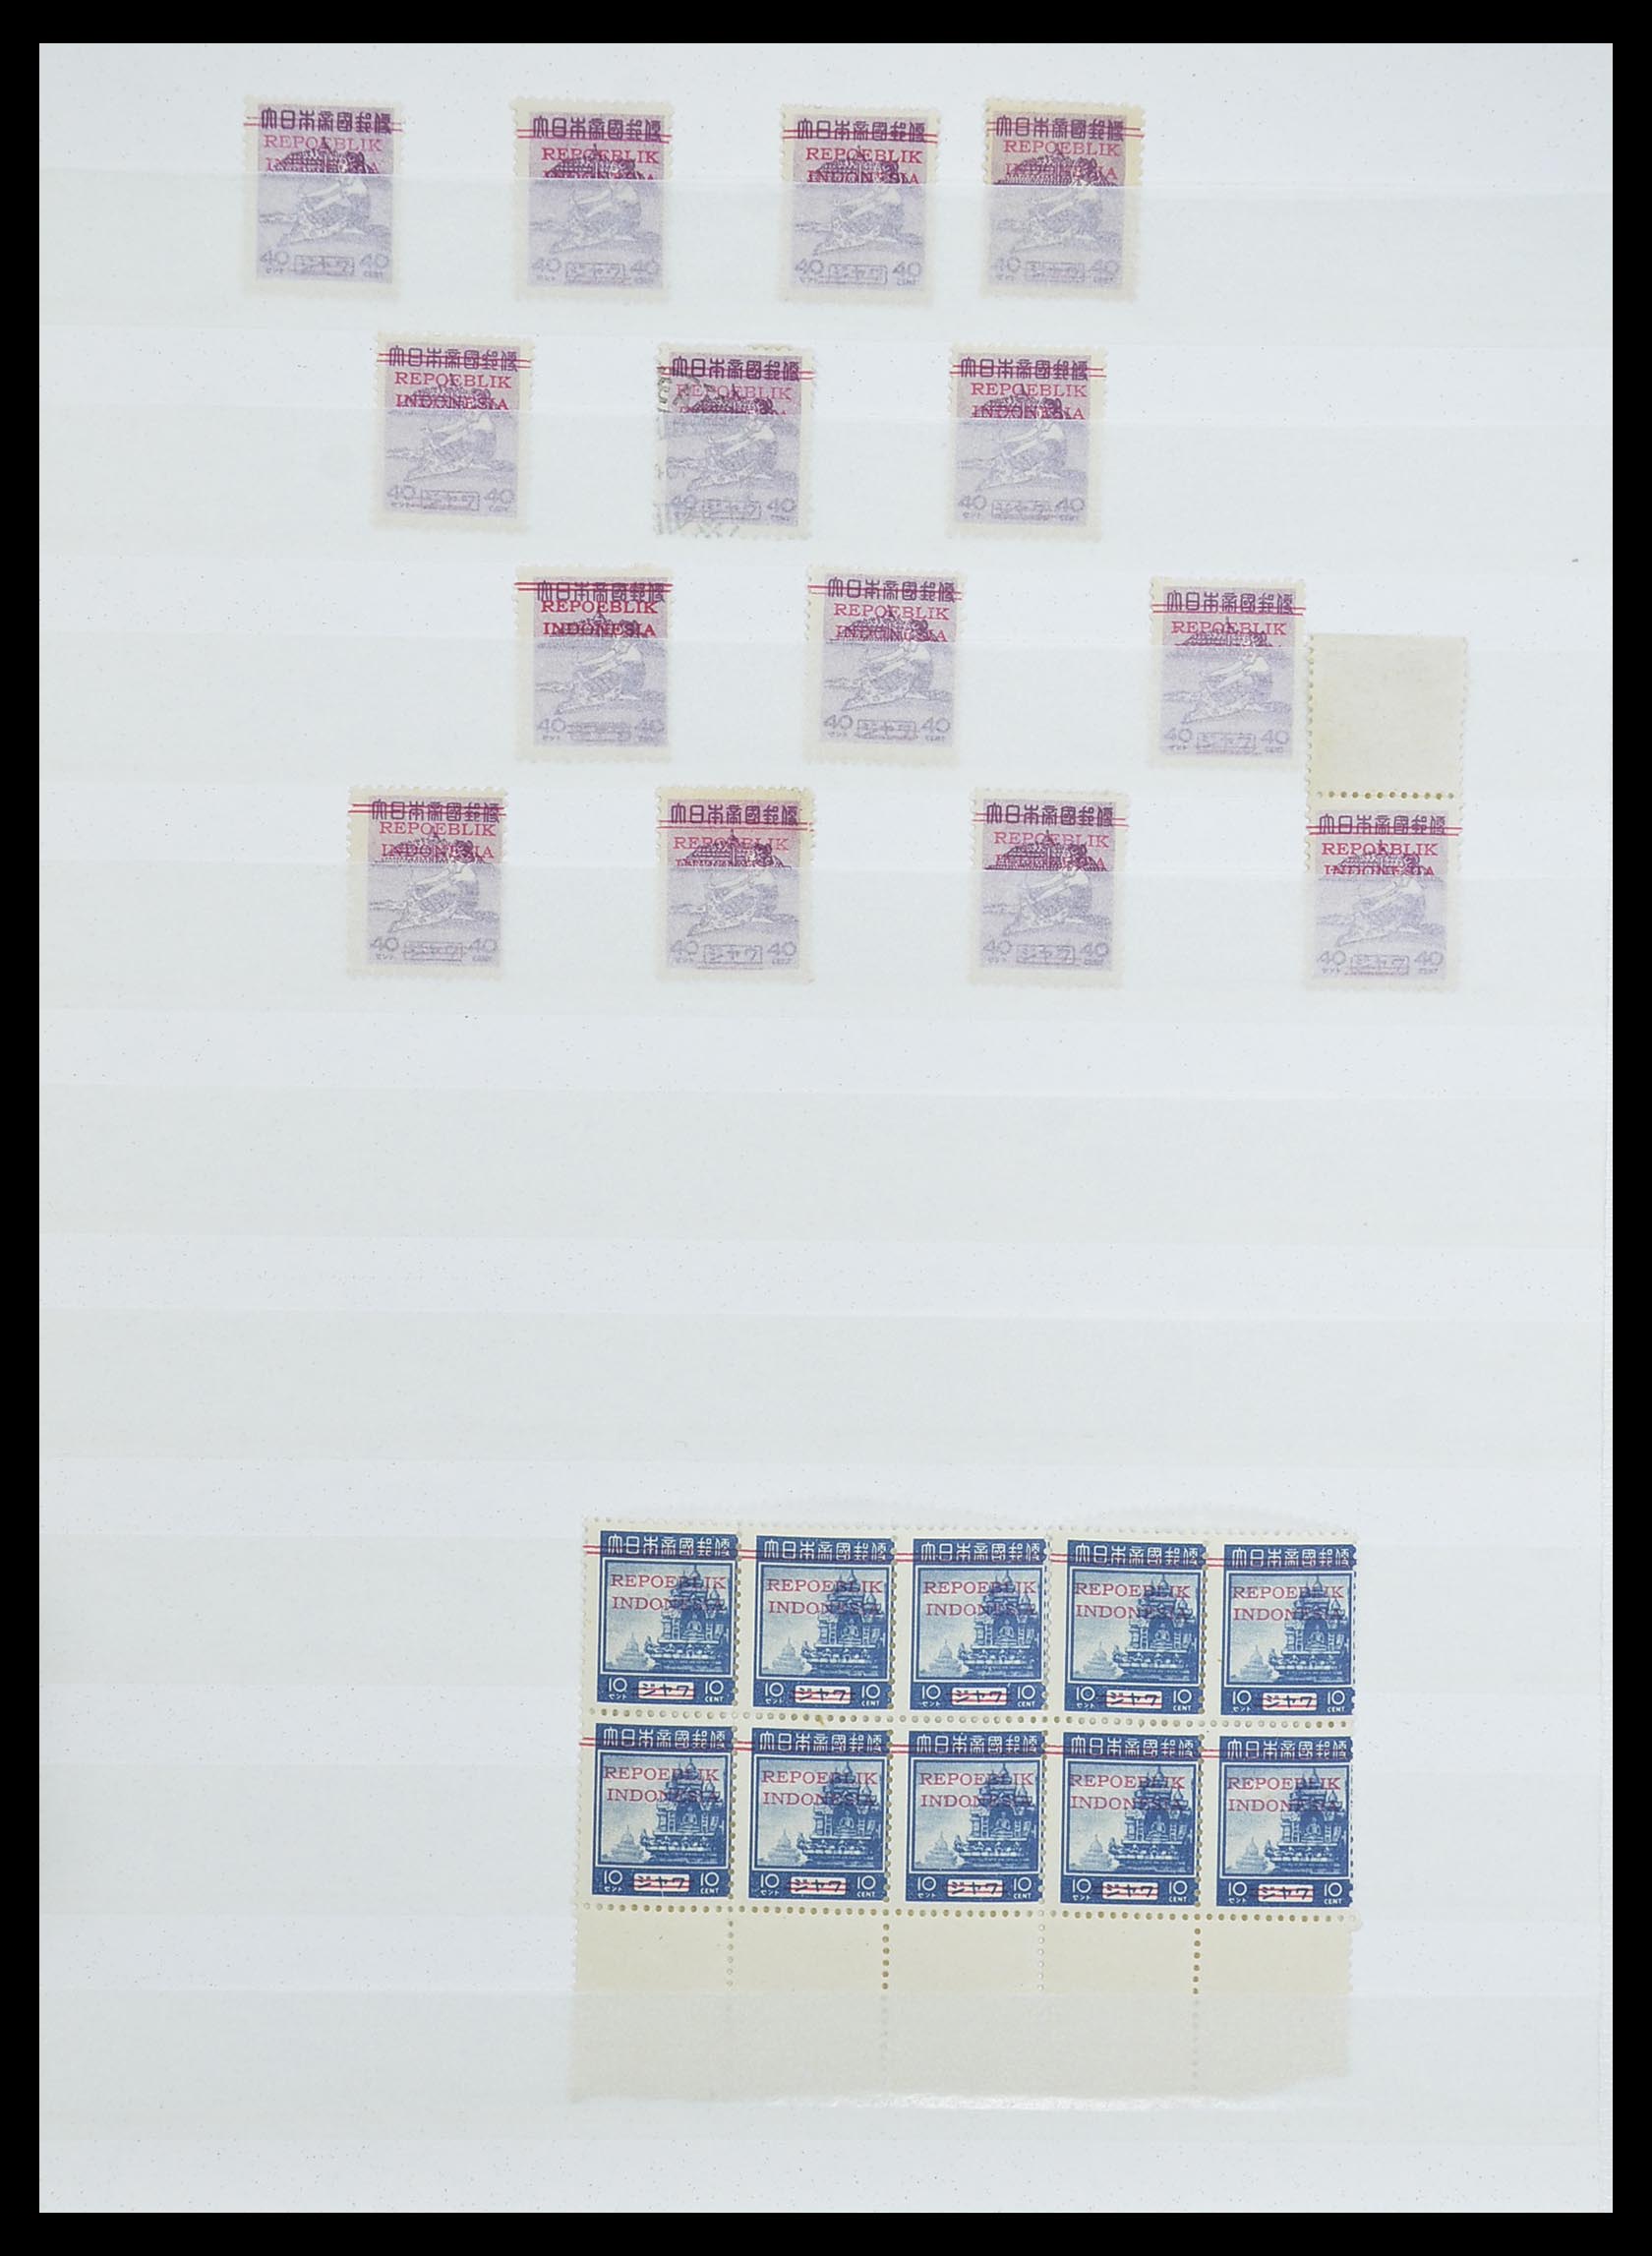 33489 018 - Stamp collection 33489 Japanese occupation Dutch east Indies and interim